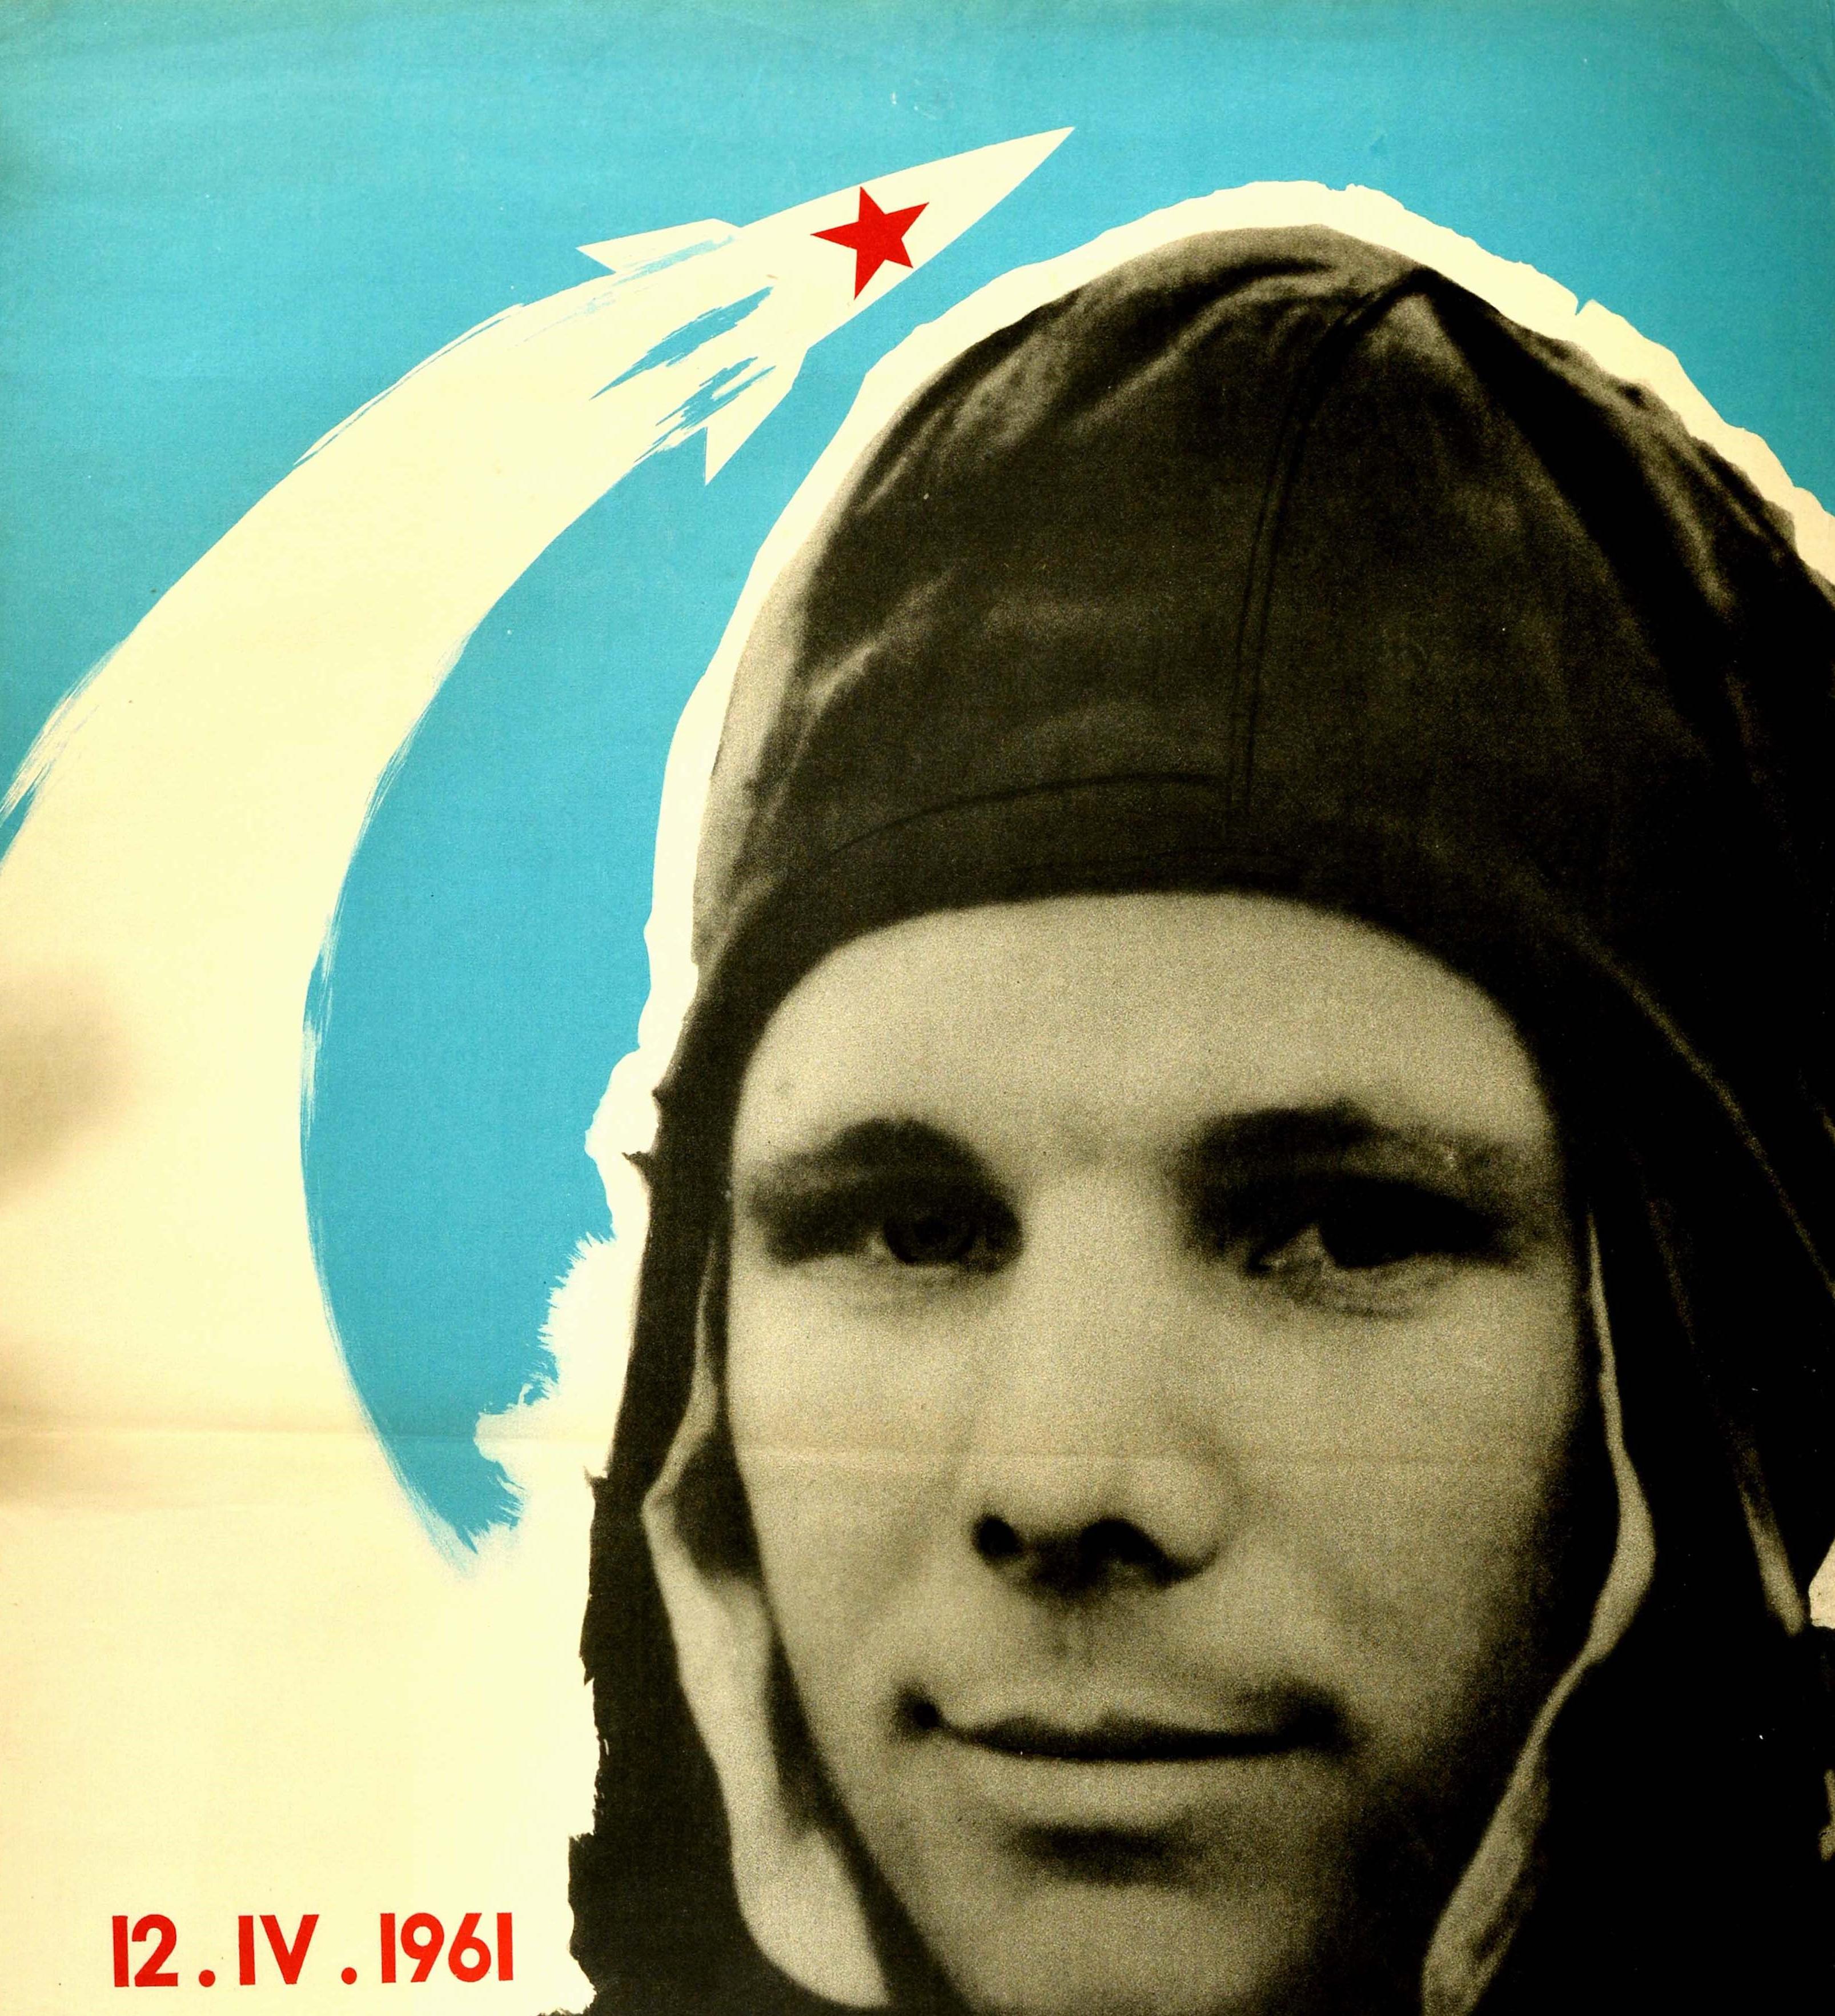 Original vintage propaganda poster issued in the Socialist Bulgaria - Glory to the First Cosmonaut Pilot Major Yuri Gagarin! - featuring a black and white photograph of the first man in space on 12 April 1961, the pilot and cosmonaut Yuri Gagarin